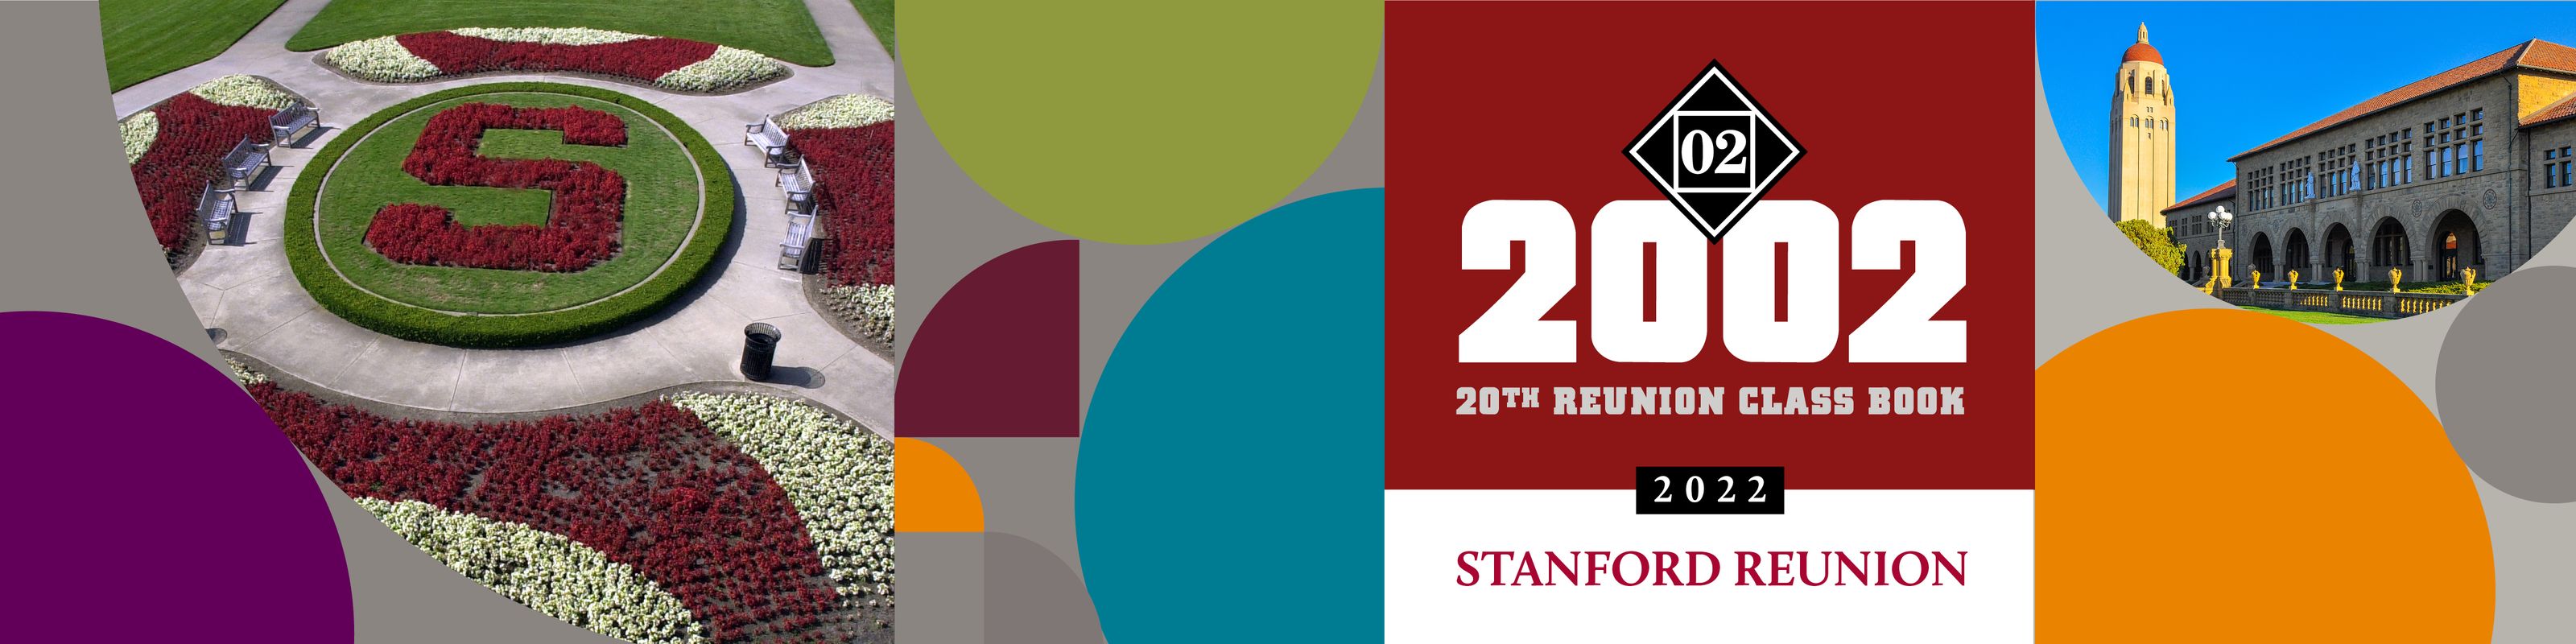 Stanford Class of 2002 – 20th Reunion